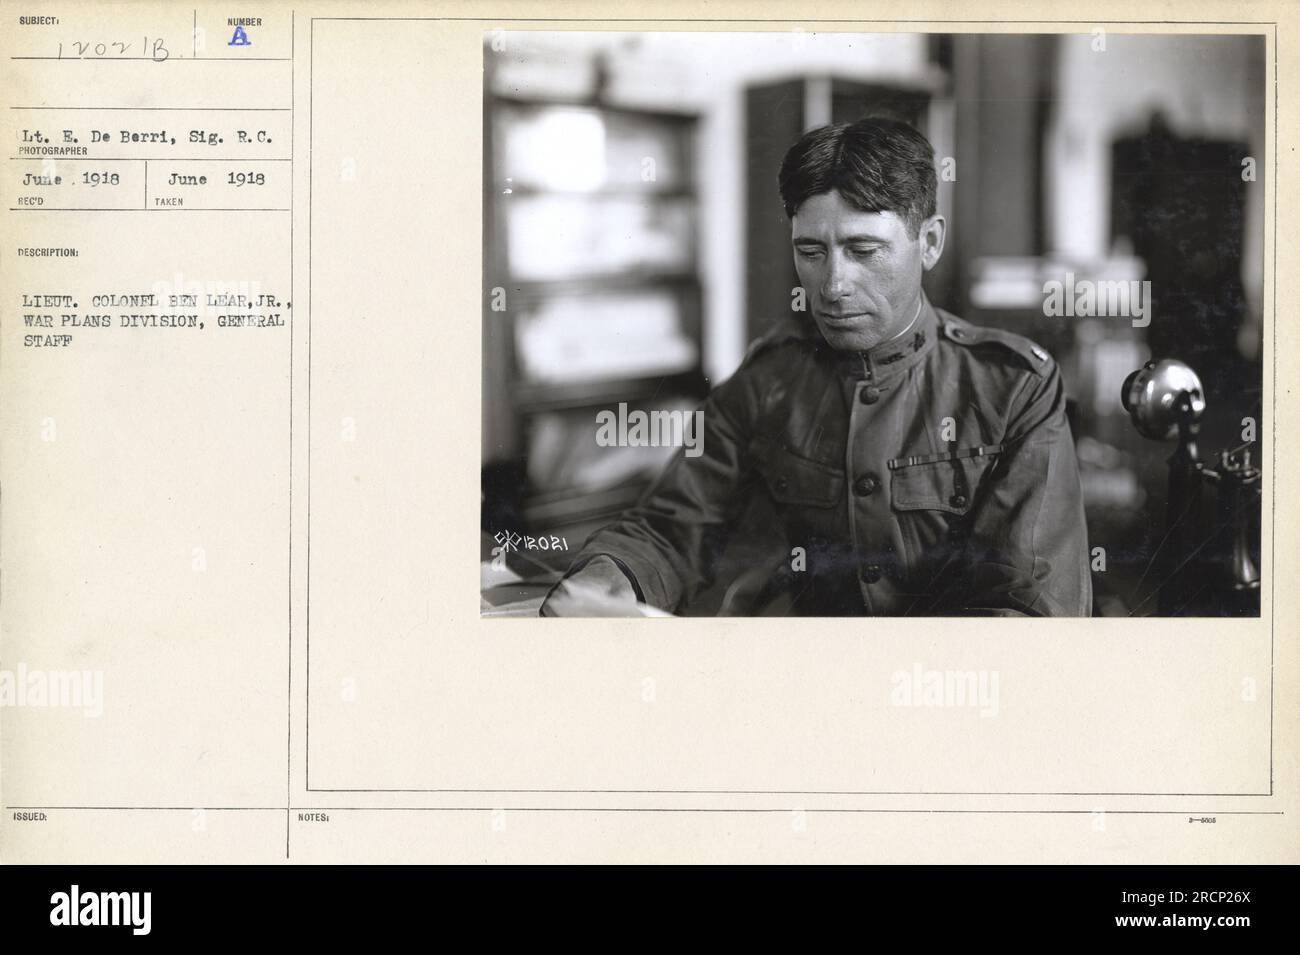 Lieutenant E. De Berri, of the Signal Corps, took this photograph in June 1918. The image depicts Lieutenant Colonel Ben Lear Jr., who served in the War Plans Division of the General Staff. The assigned photograph number for this image is 2021. Stock Photo